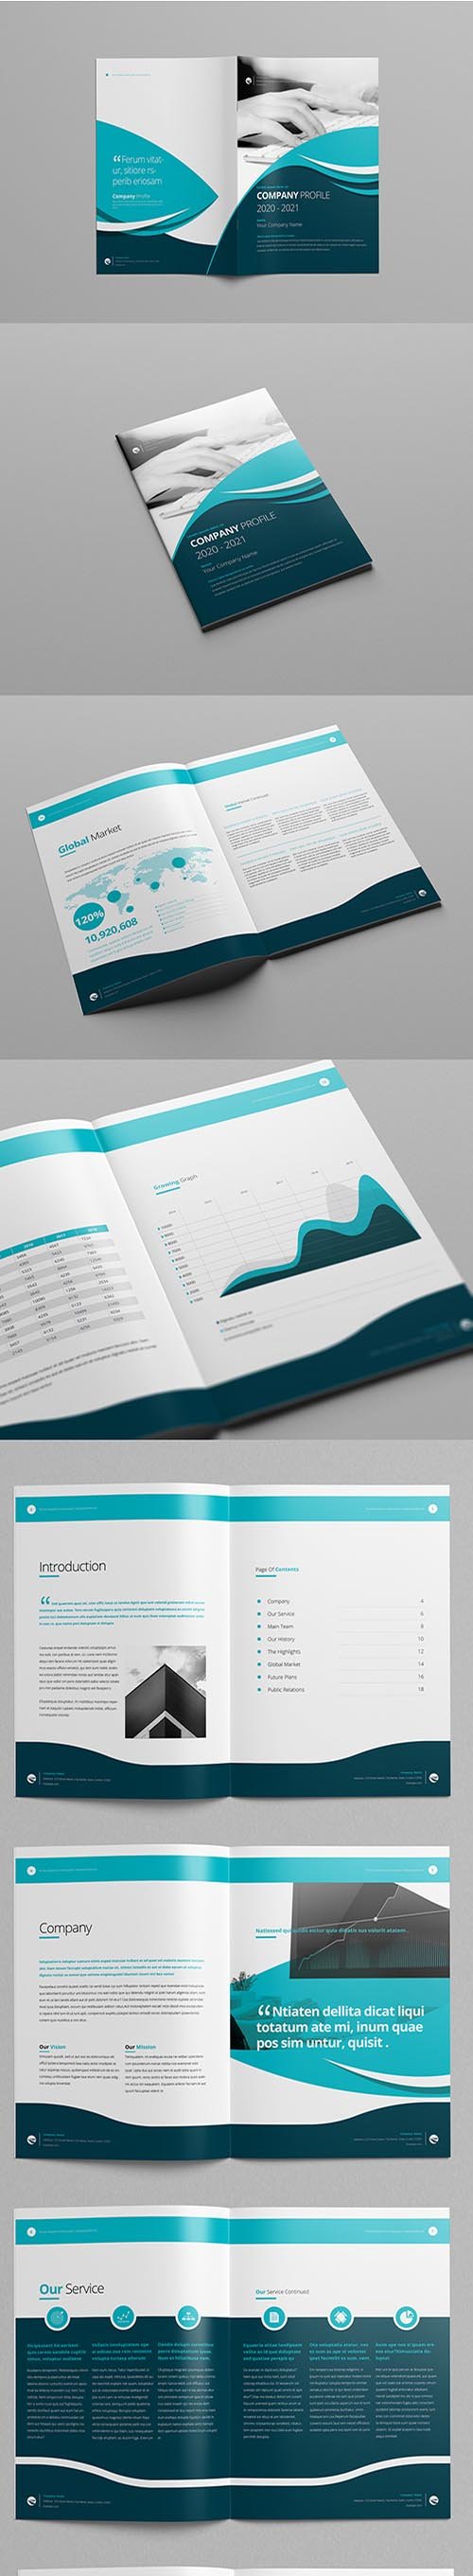 Company Profile Layout with Teal and Blue Accents 220149458 INDT